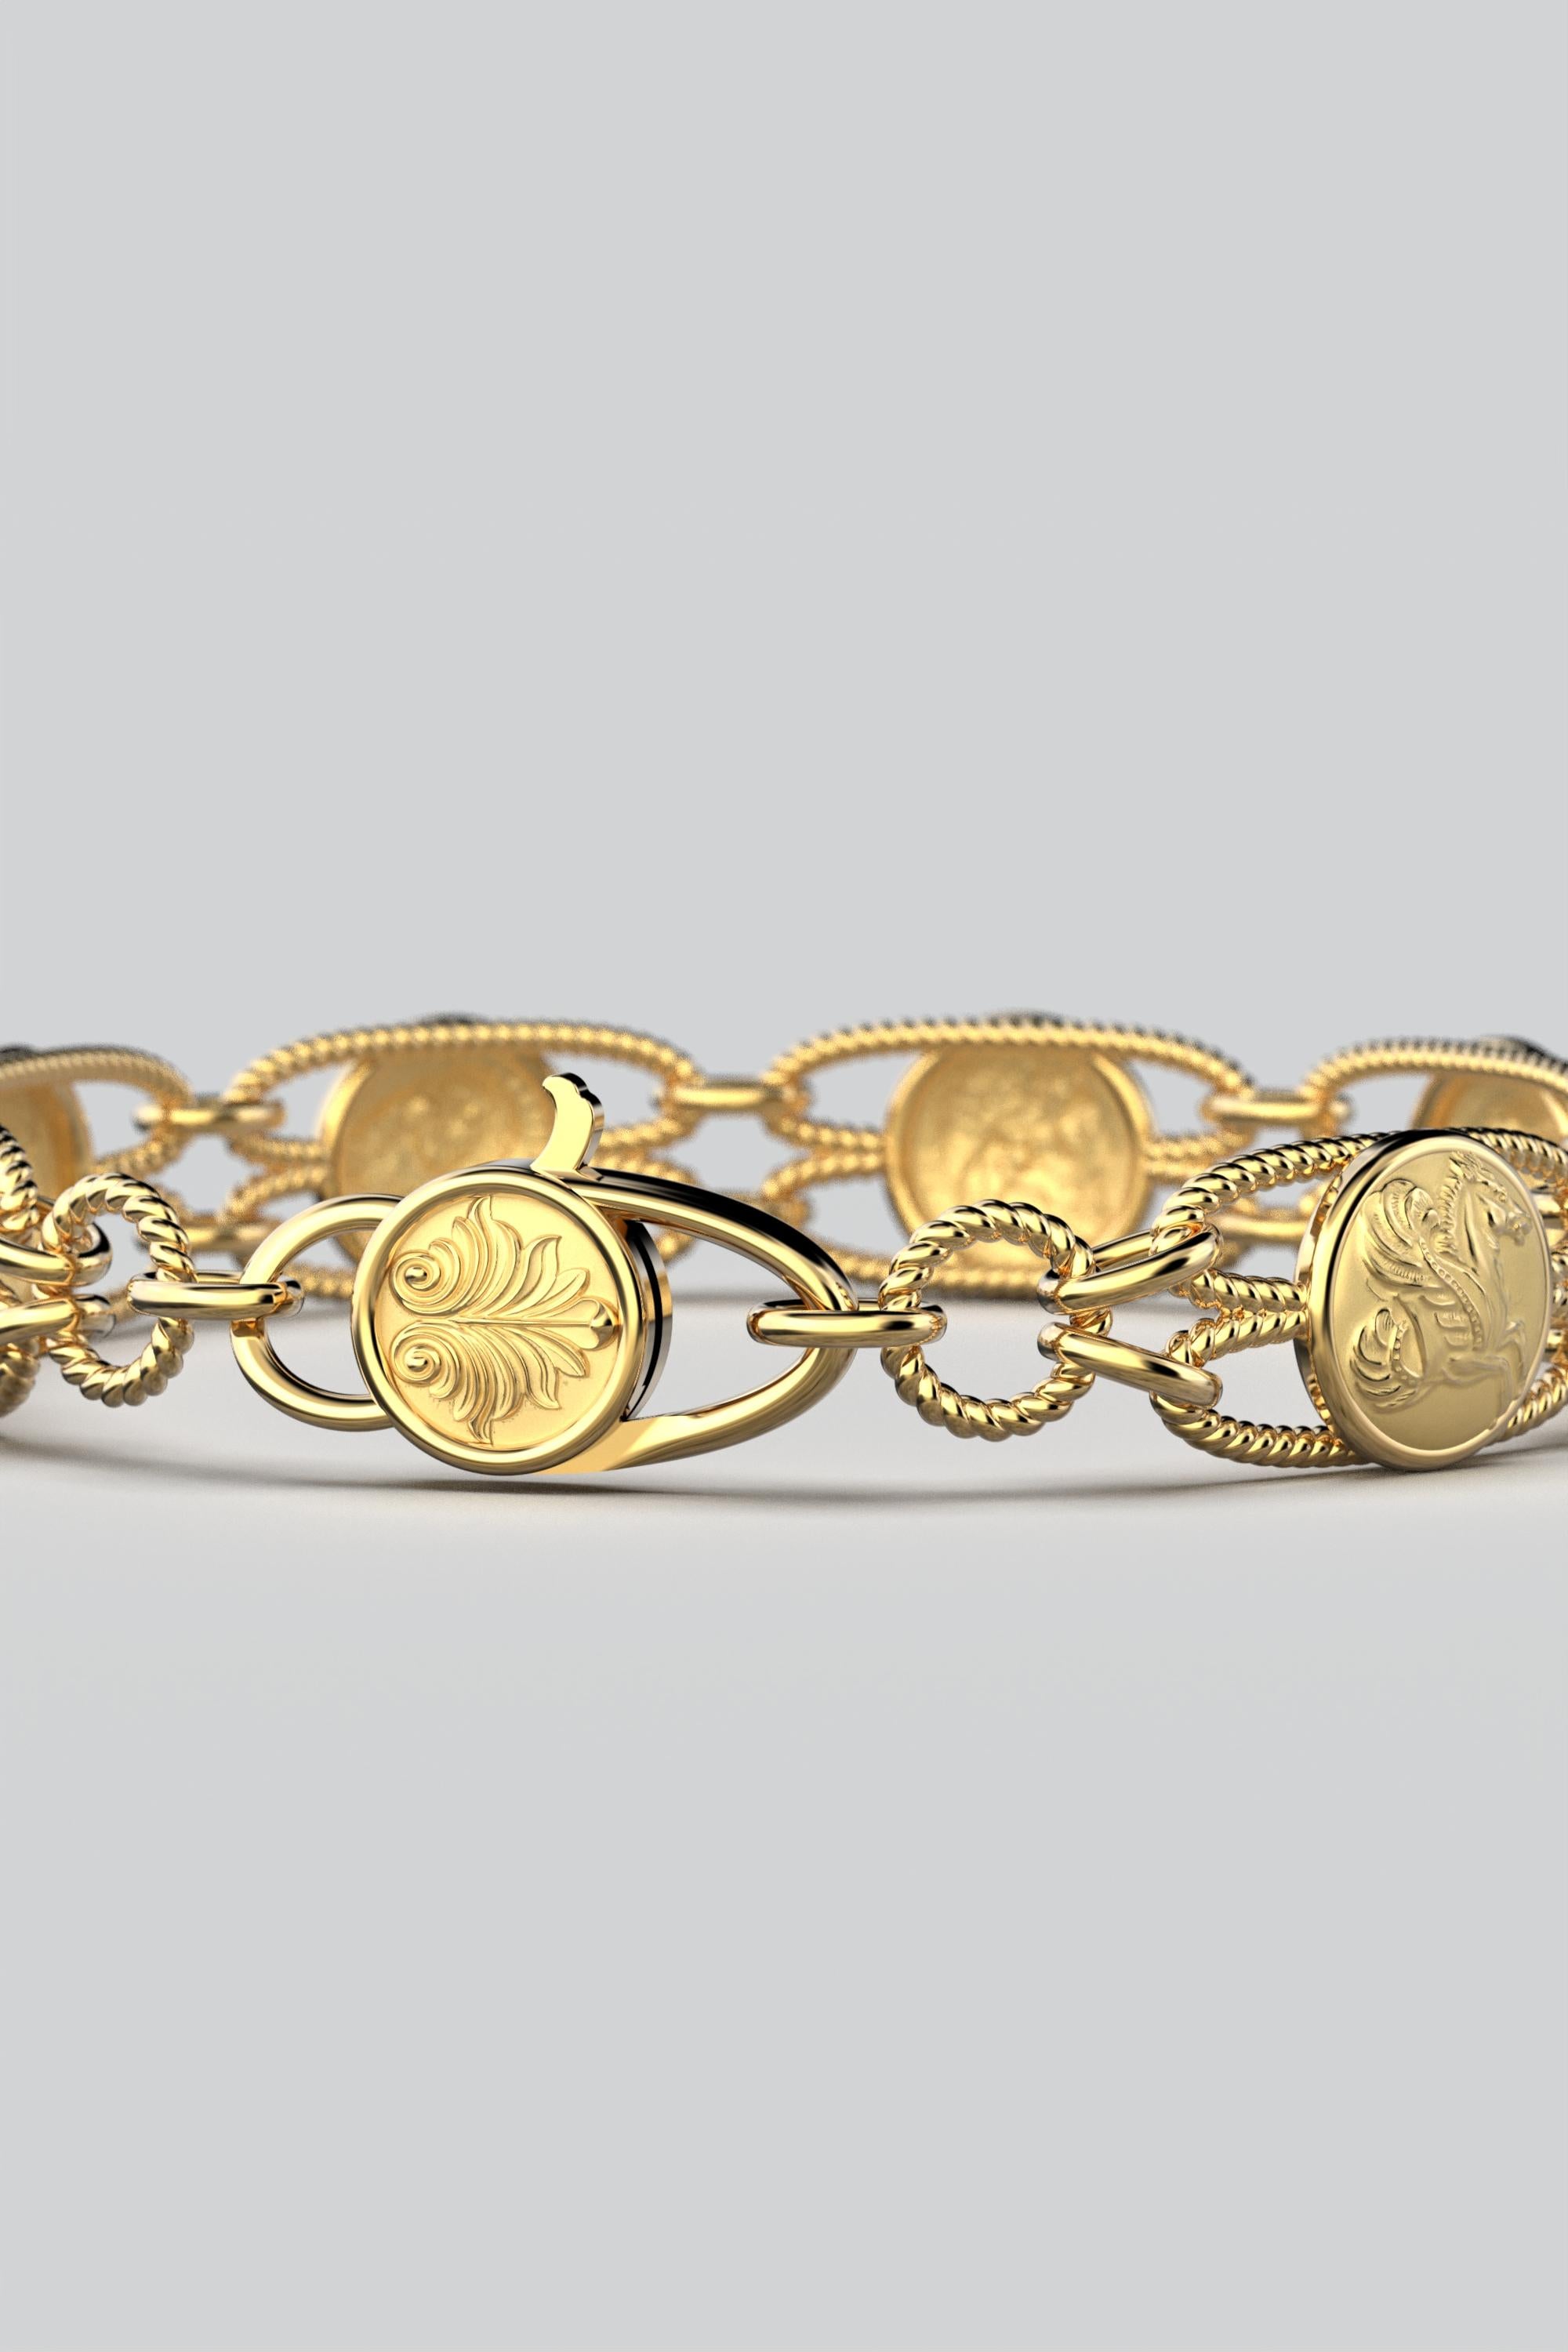 Made to order.
Discover our Italian Gold Bracelet in your choice of 14k or 18k solid gold, designed in a captivating Greek Coin Style Link with a delicate rope chain. This exquisite piece of Italian Fine Jewelry is meticulously handcrafted in the